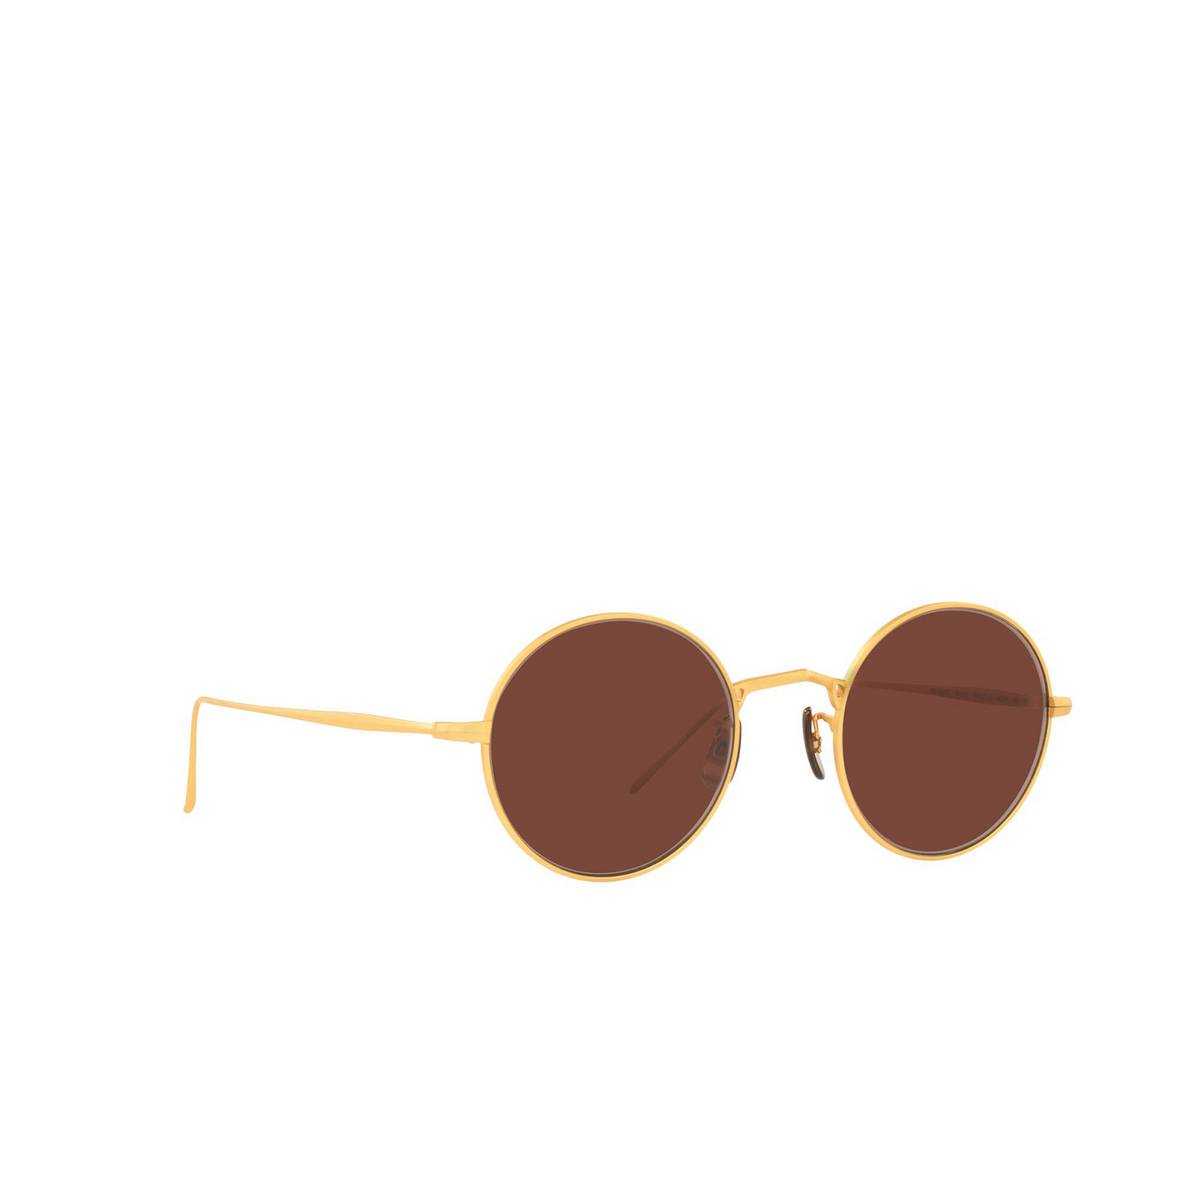 Oliver Peoples G. PONTI-3 Sunglasses 5414C5 Brushed Brass - three-quarters view